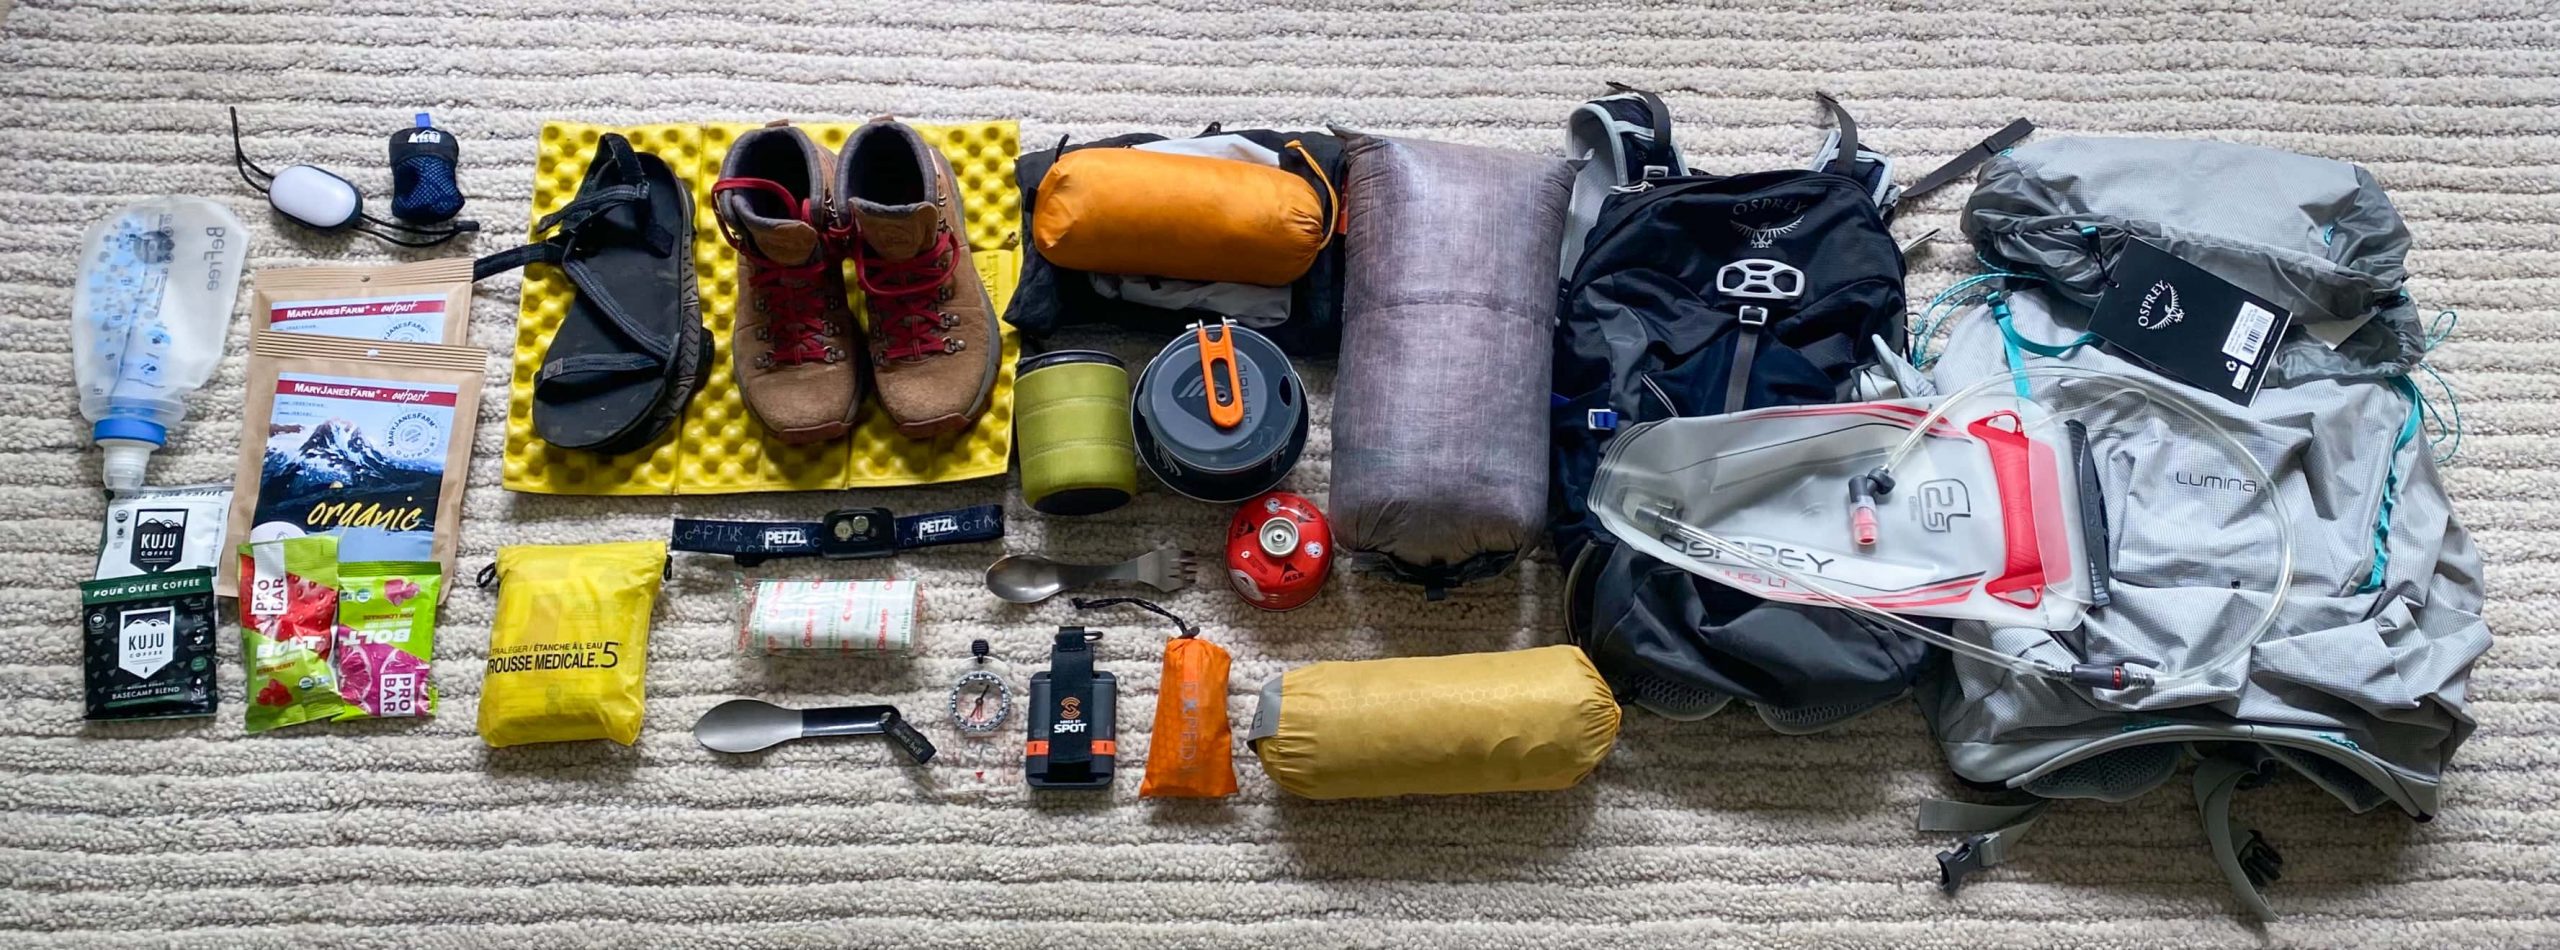 How To Prepare for Hiking and Backpacking Trips - Sort and Organize Gear